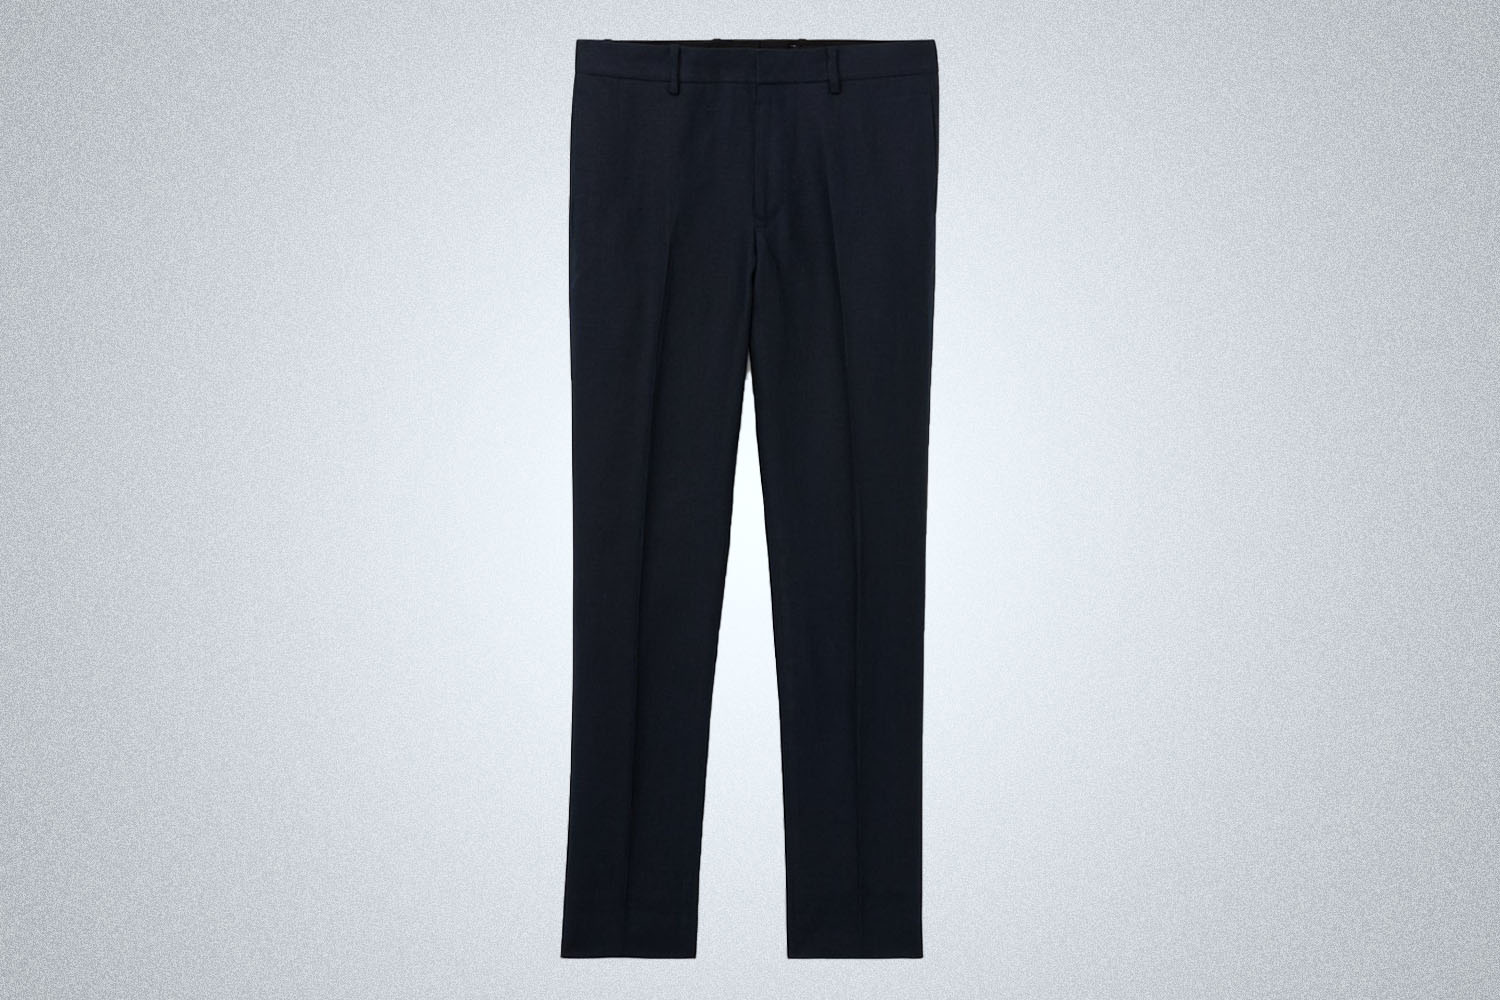 a pair of blue linen pants from Club Monaco on a grey background